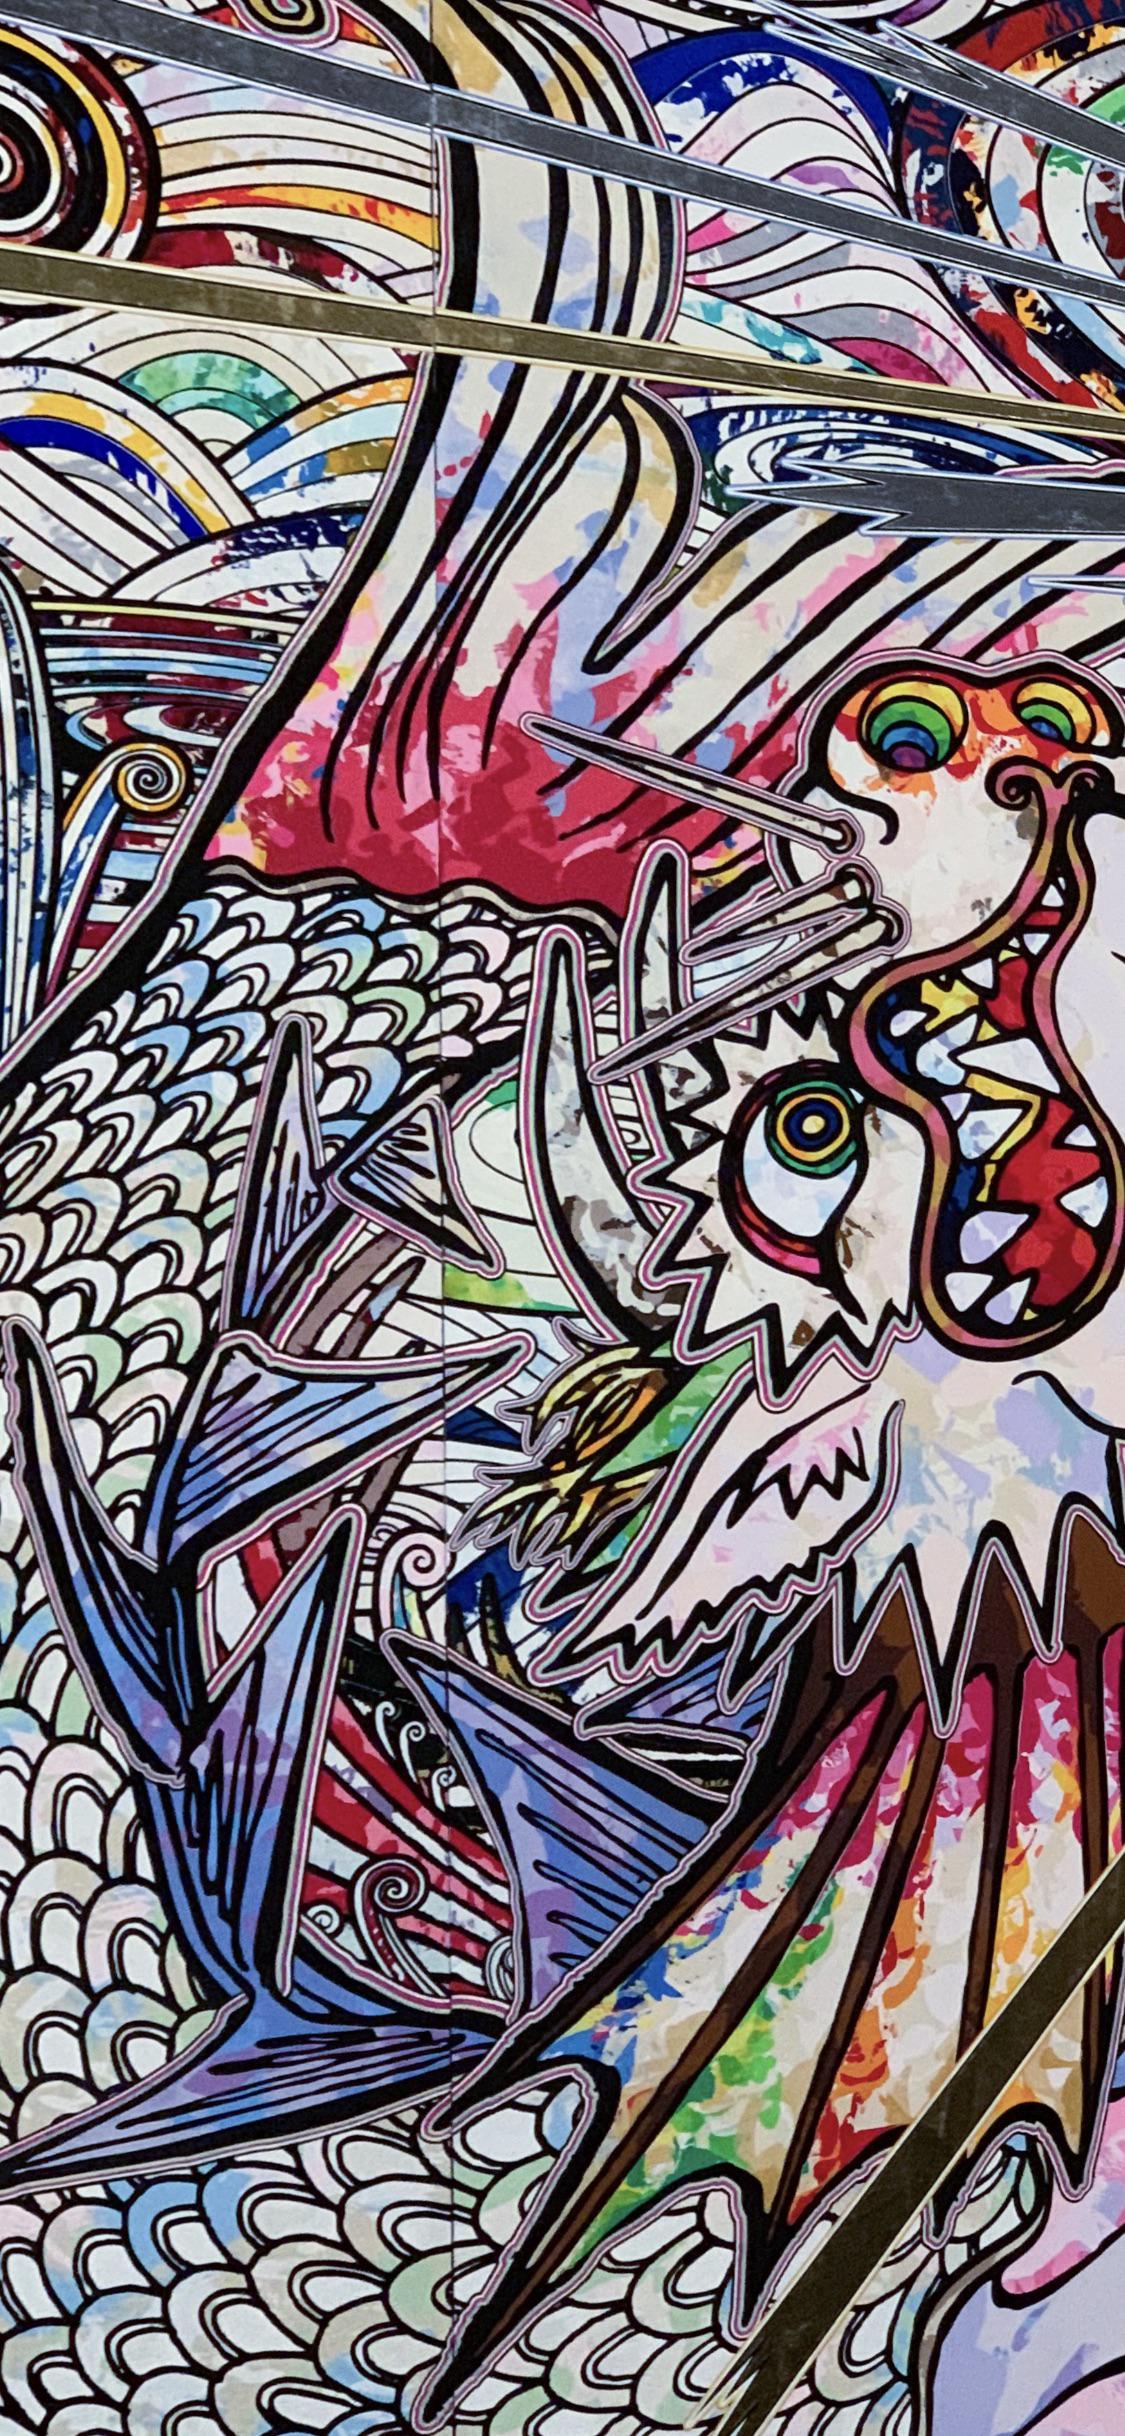 My current XS Max wallpaper I snapped of a Murakami Takashi mural